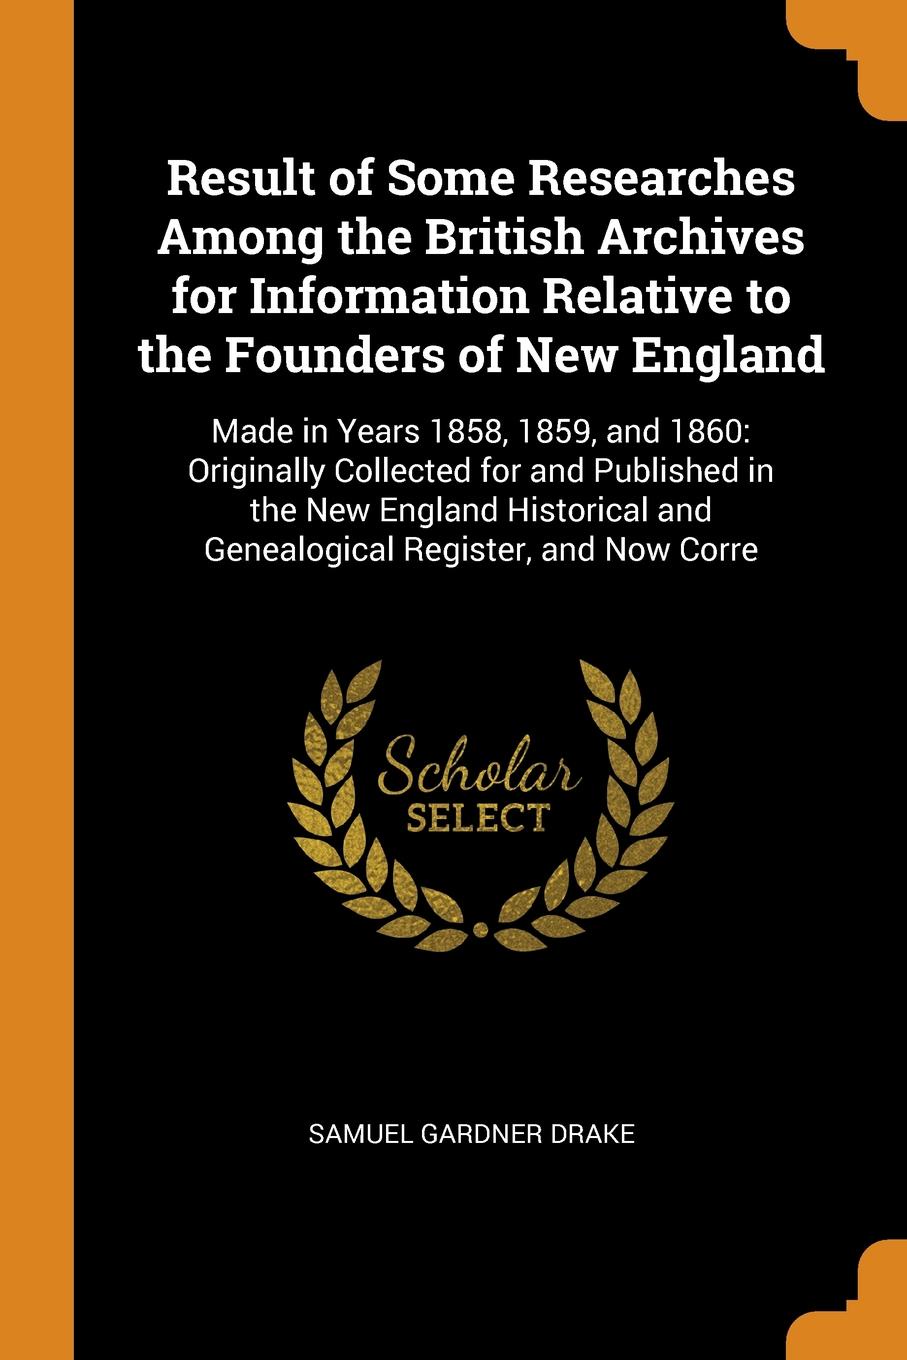 Result of Some Researches Among the British Archives for Information Relative to the Founders of New England. Made in Years 1858, 1859, and 1860: Originally Collected for and Published in the New England Historical and Genealogical Register, and N...